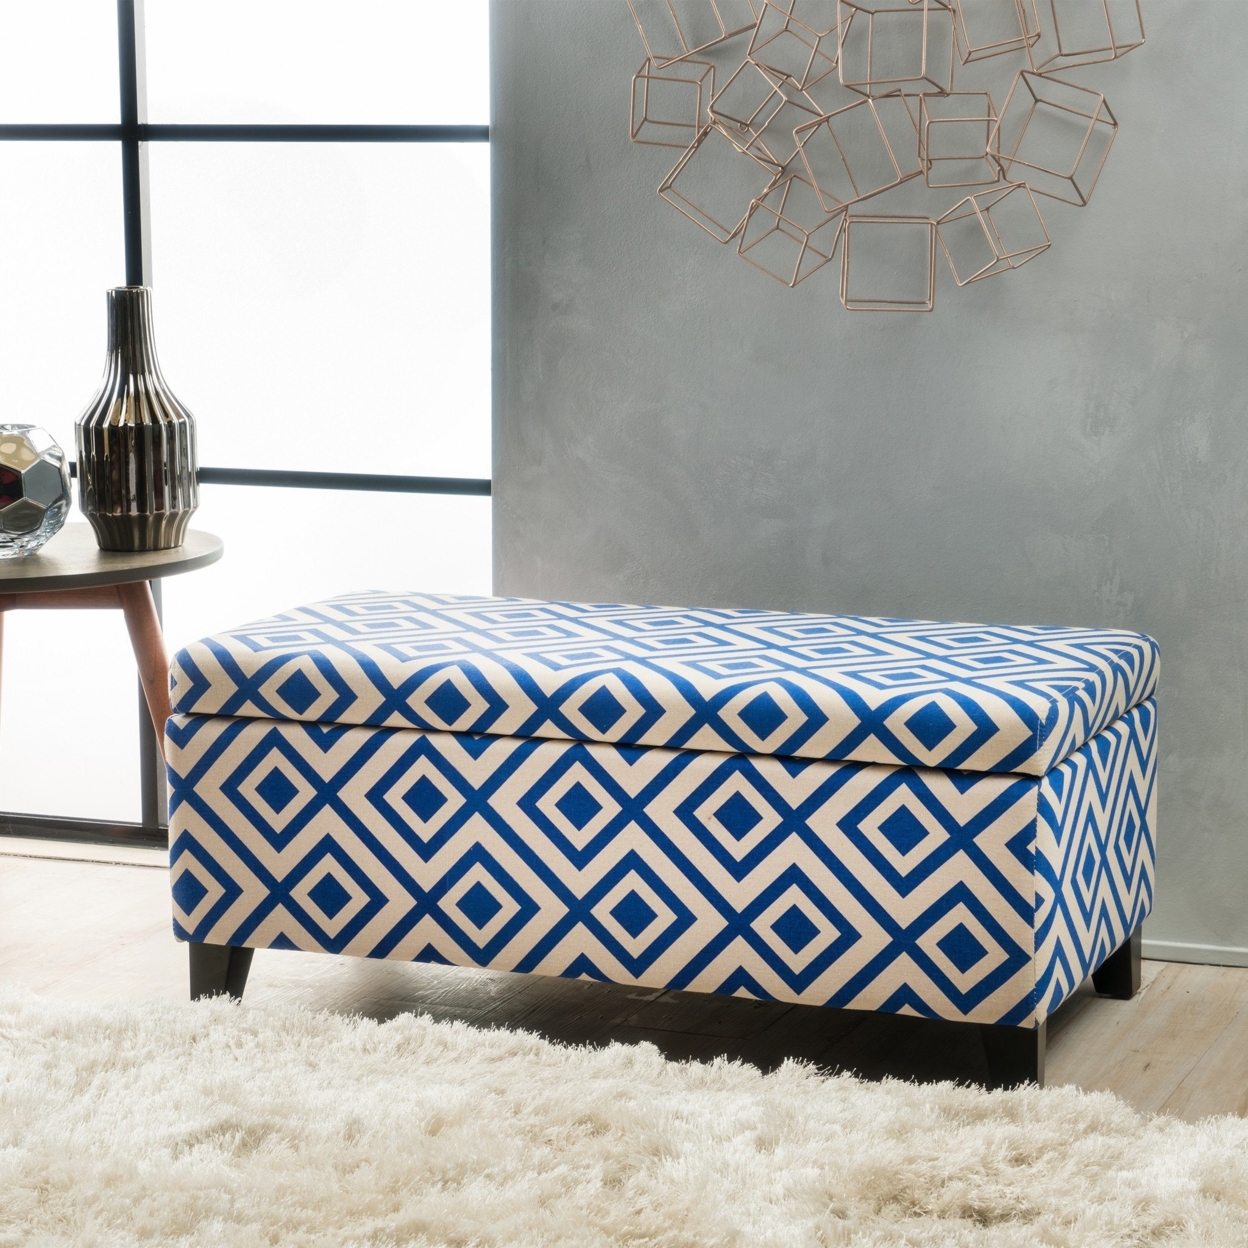 Atlantic Contemporary Fabric Upholstered Storage Ottoman - Teal